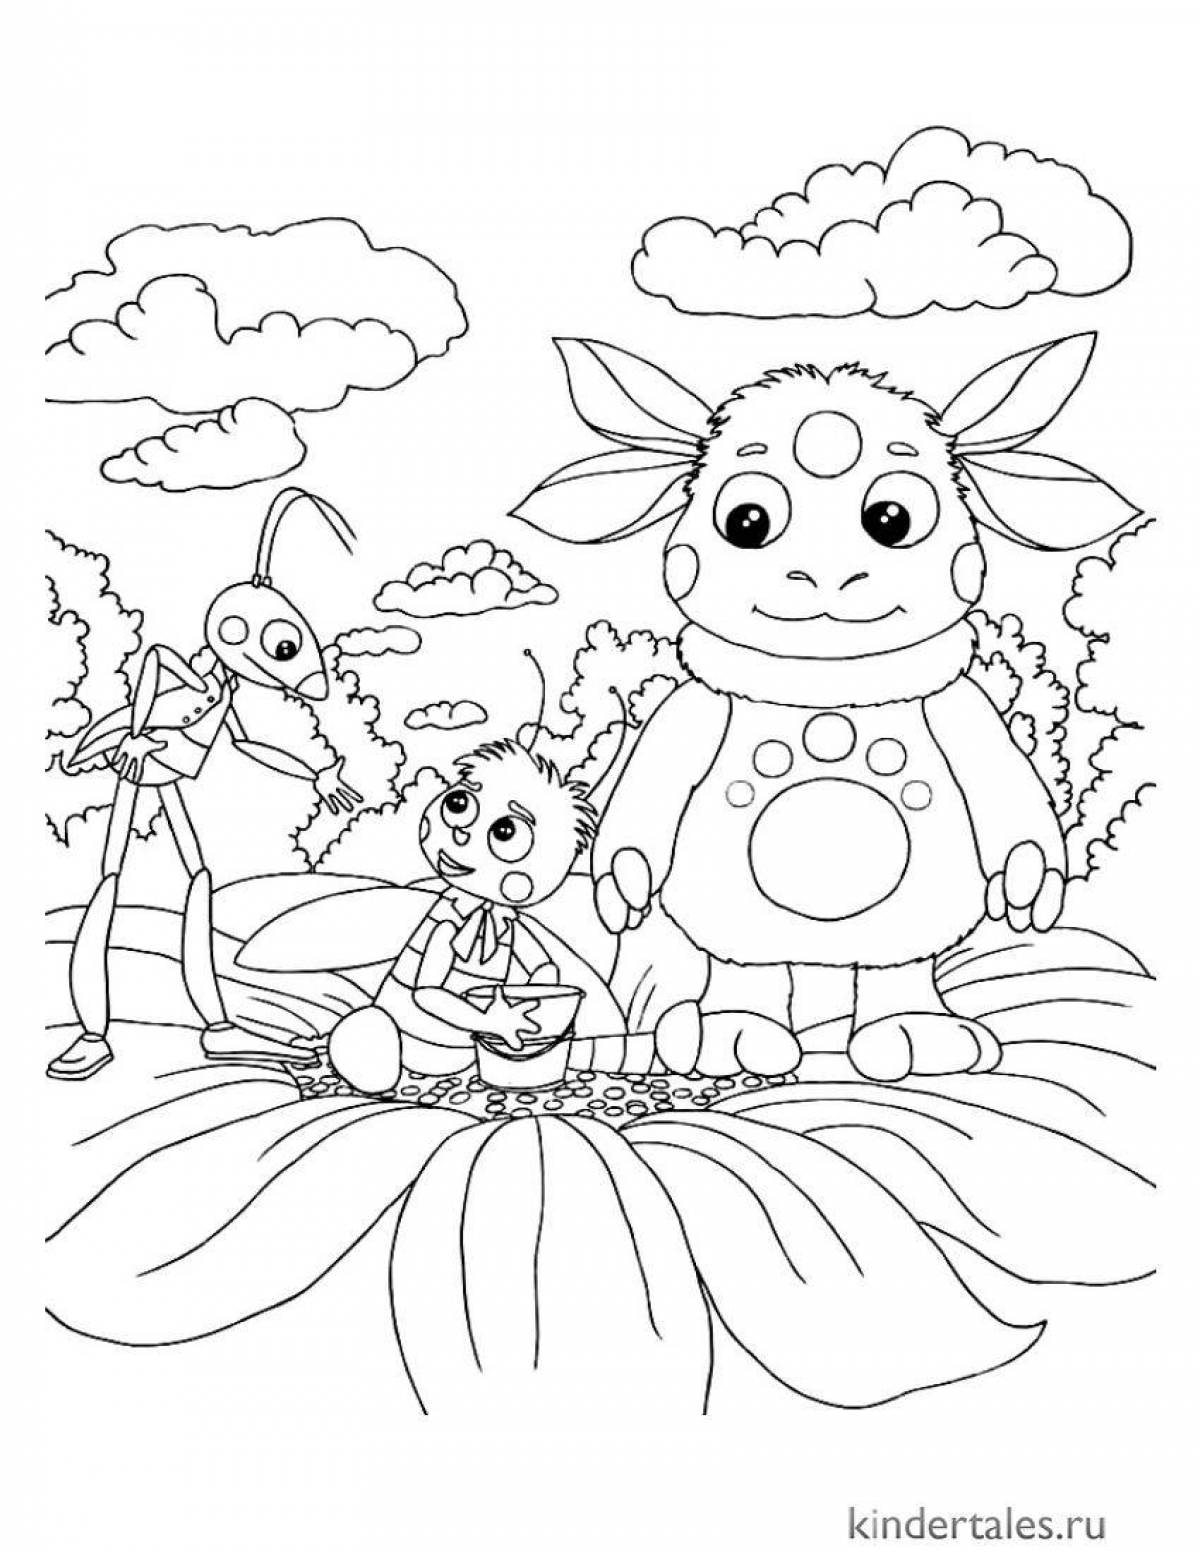 Color explosion Luntik coloring book for children 3-4 years old